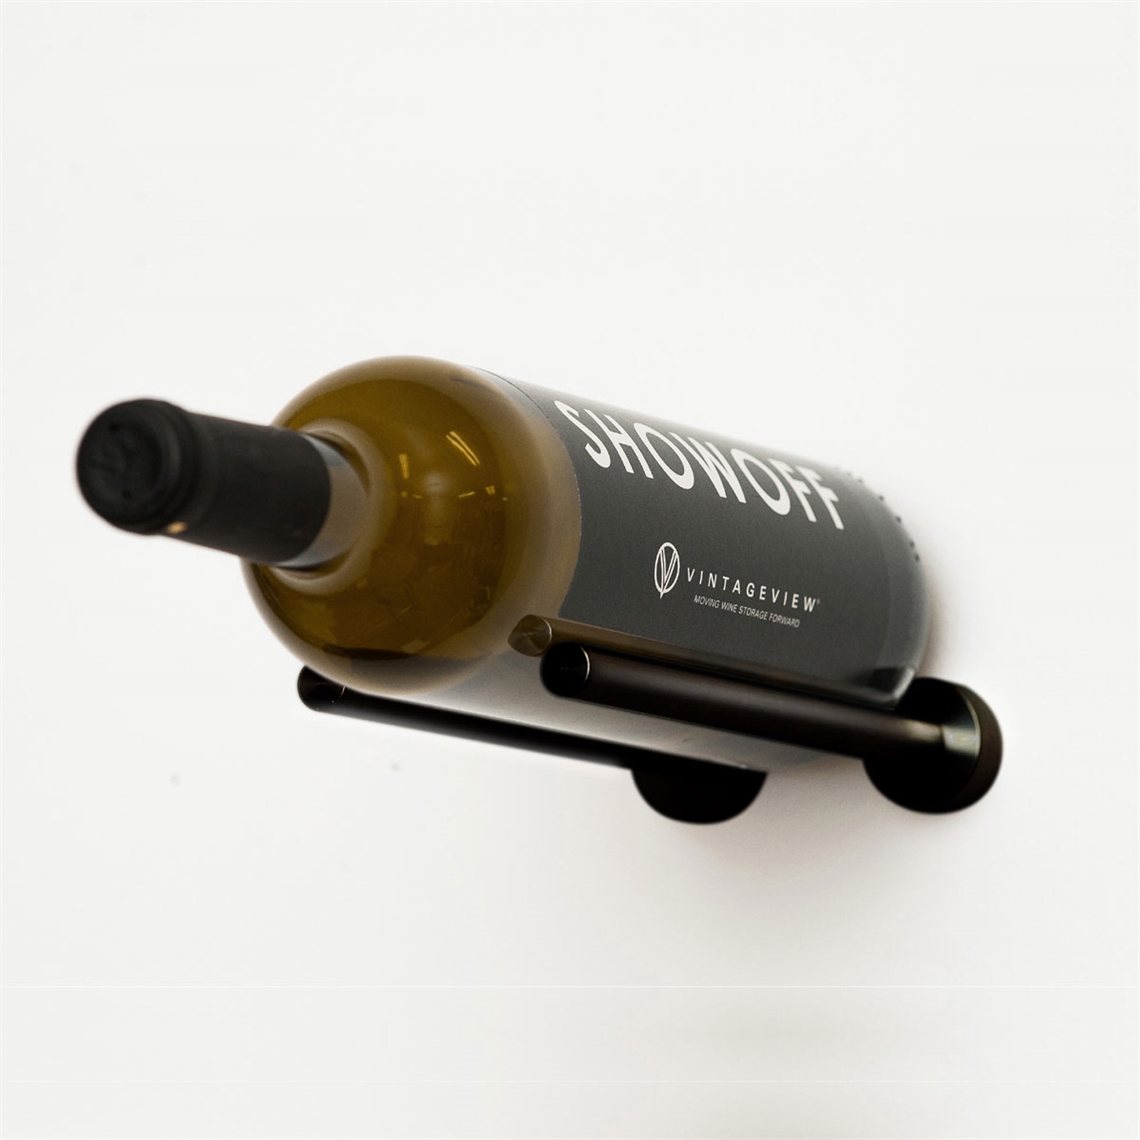 View more isoco from our Wall Mounted Wine Racks range